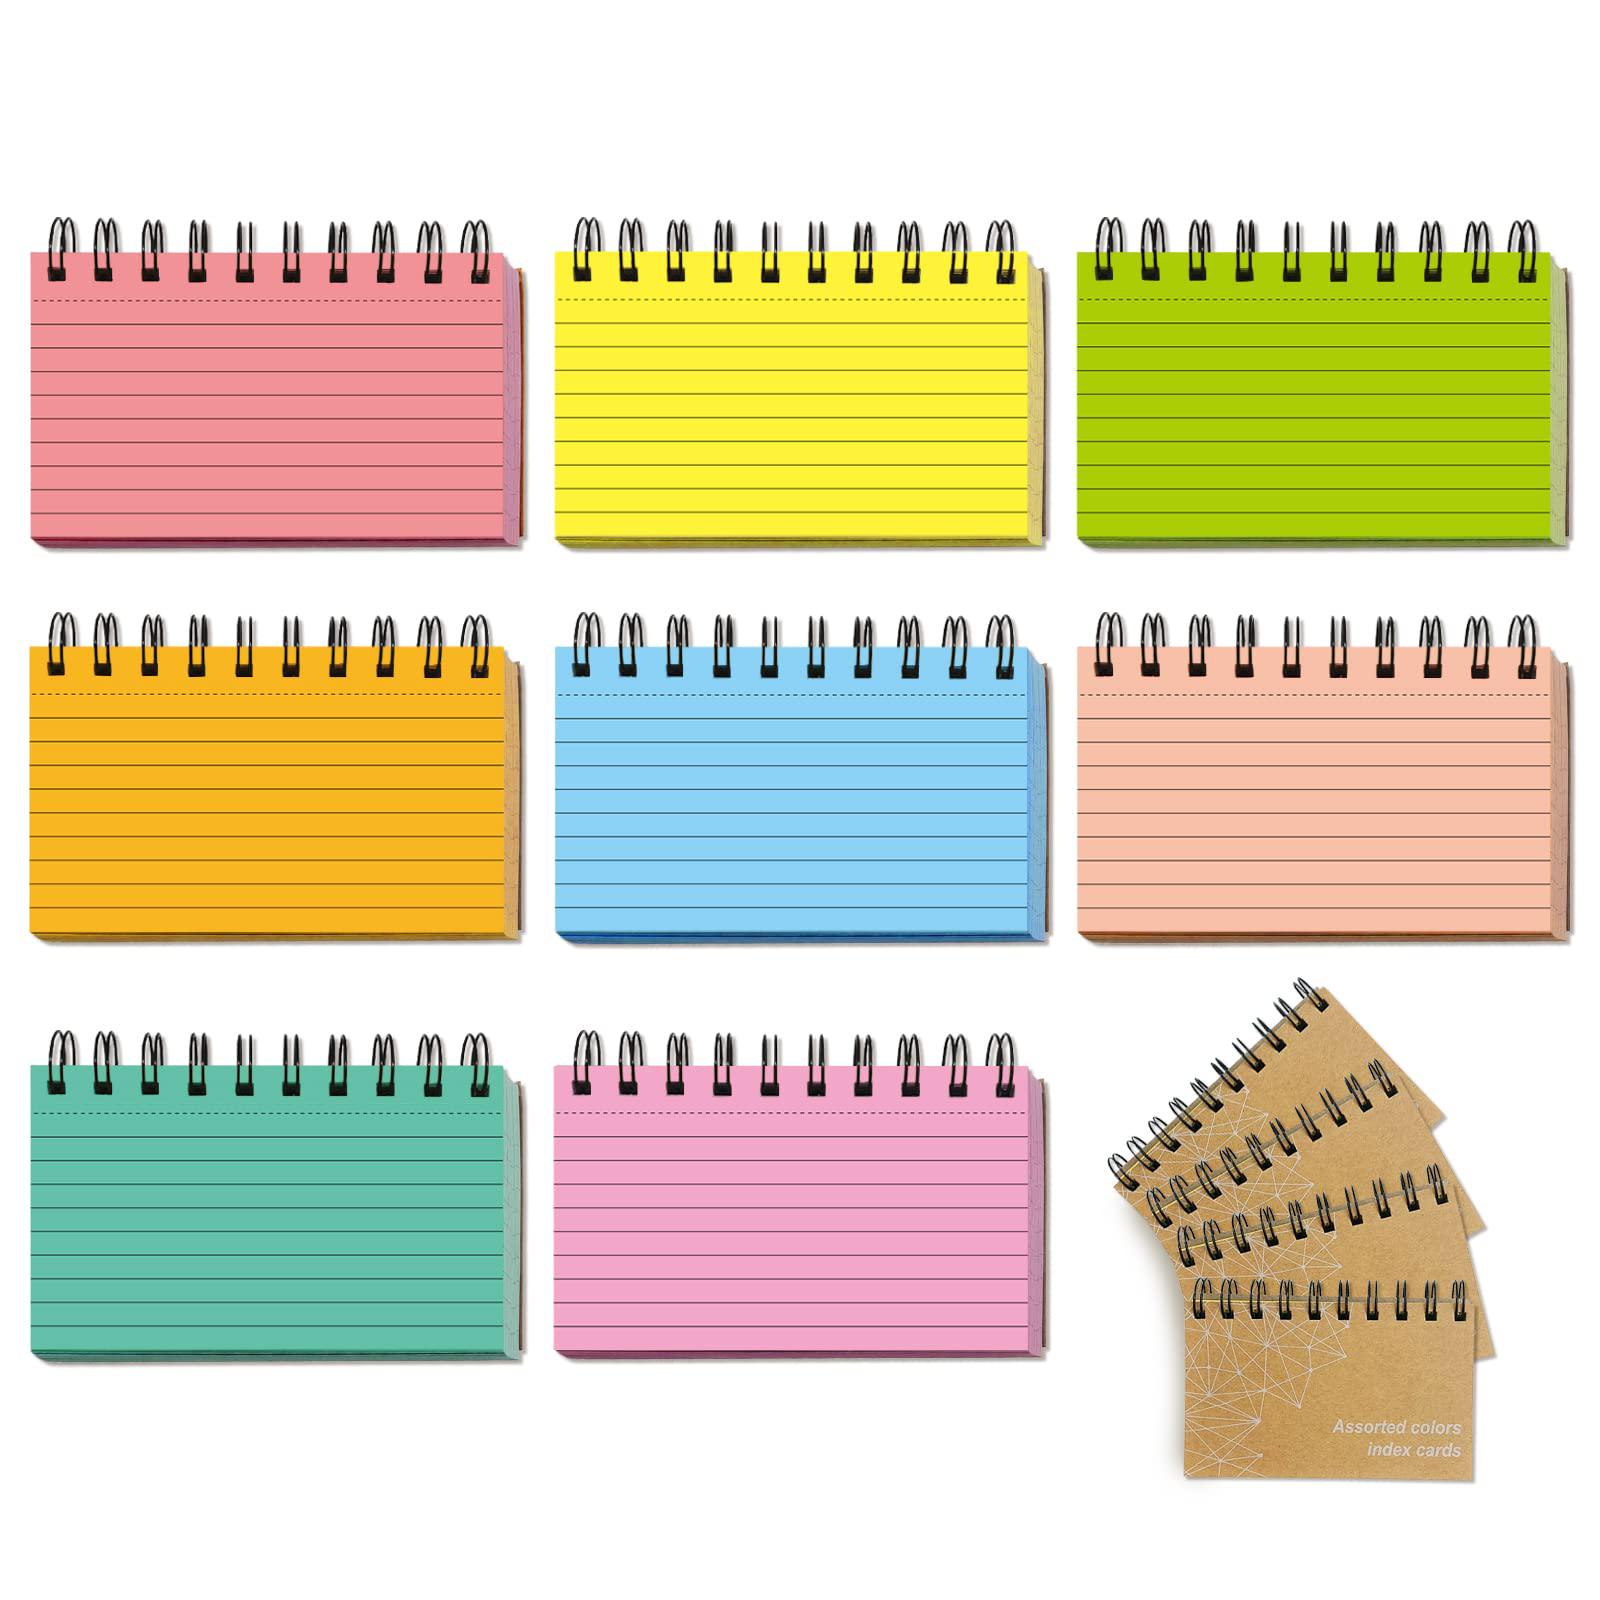 paper master blank index cards, assorted colored ruled index cards 3x5 inches, great spiral note cards & memo cards for schoo